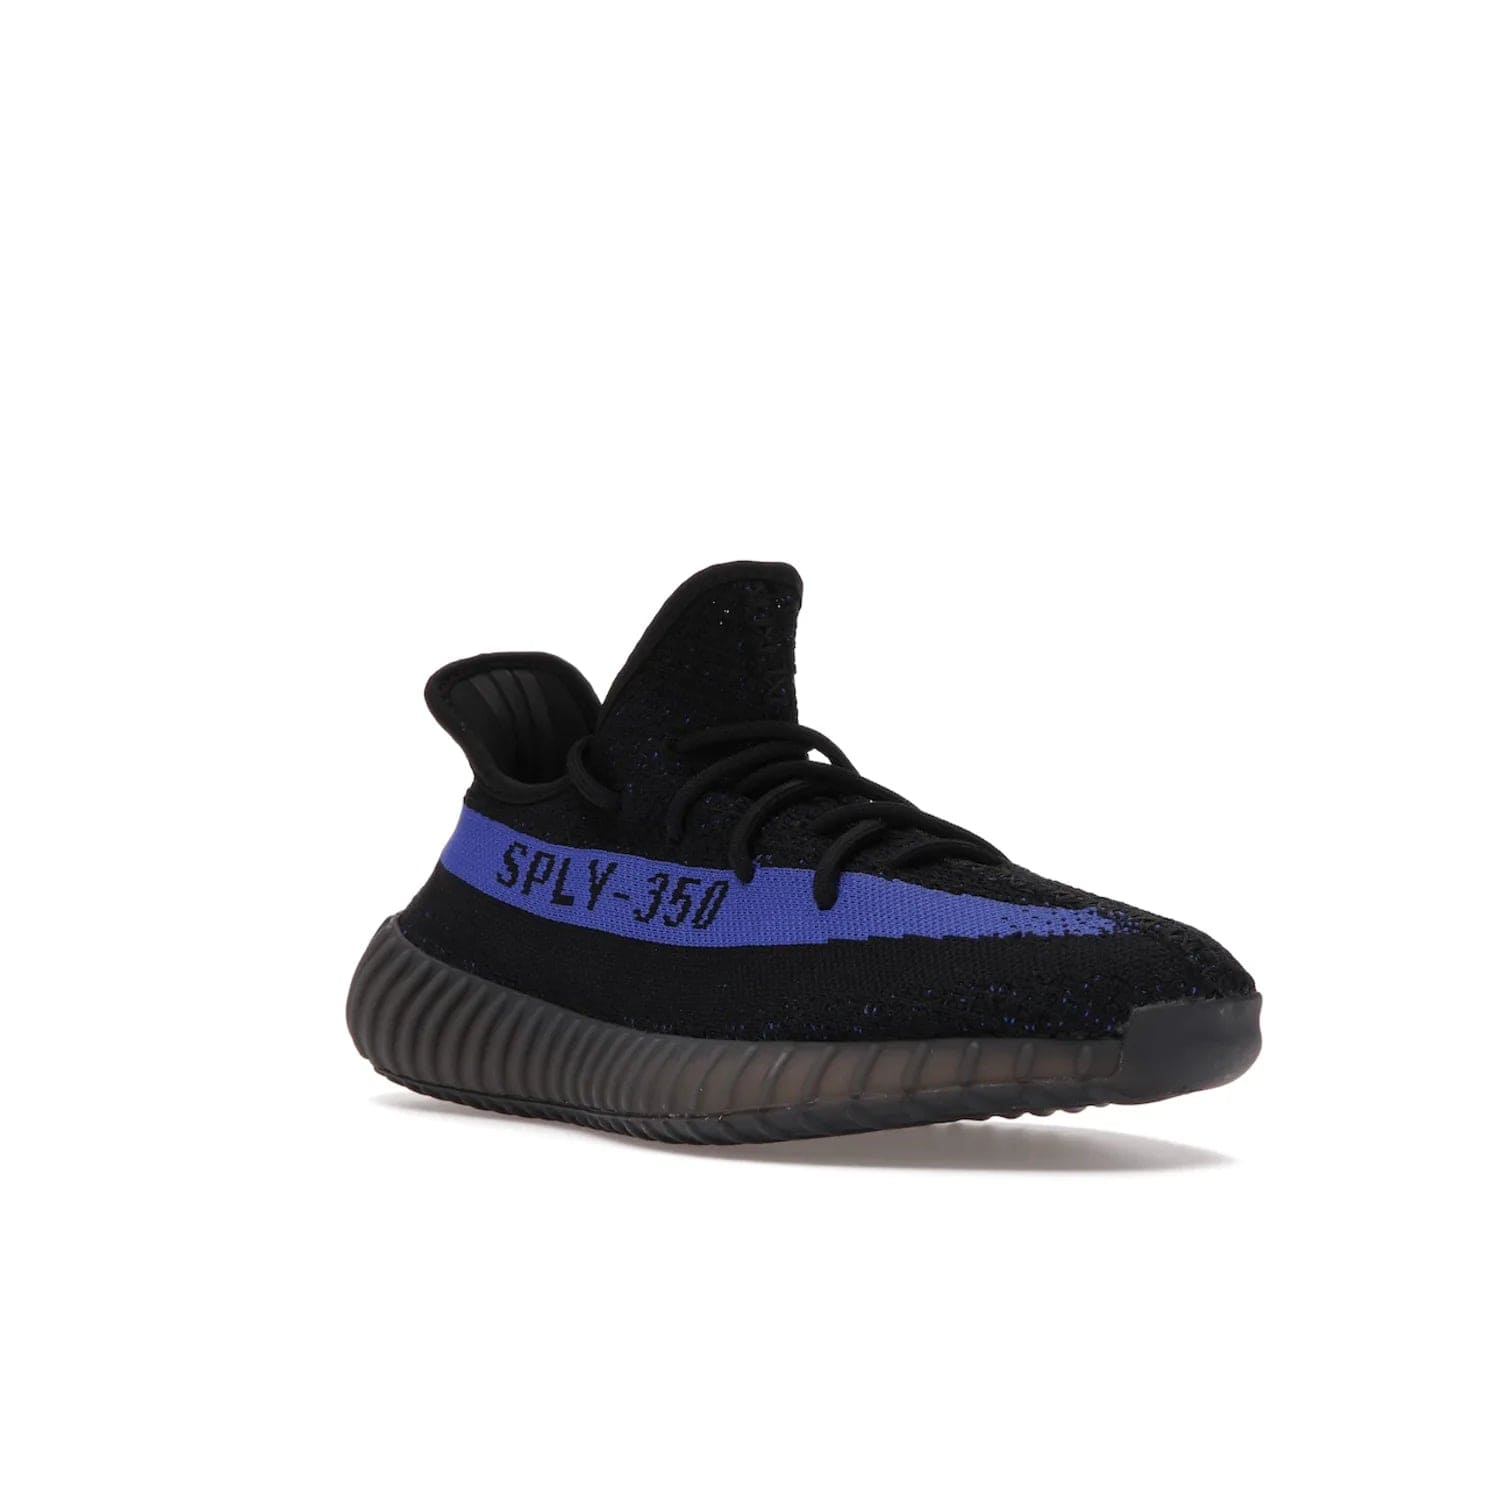 adidas Yeezy Boost 350 V2 Dazzling Blue - Image 6 - Only at www.BallersClubKickz.com - Shop the Adidas Yeezy 350 V2 Dazzling Blue, featuring a solid black Primeknit upper, Dazzling Blue side stripe, “SPLY-350” text, and a muted Boost sole. Releasing Feb 2022, this style is perfect for any shoe fan.